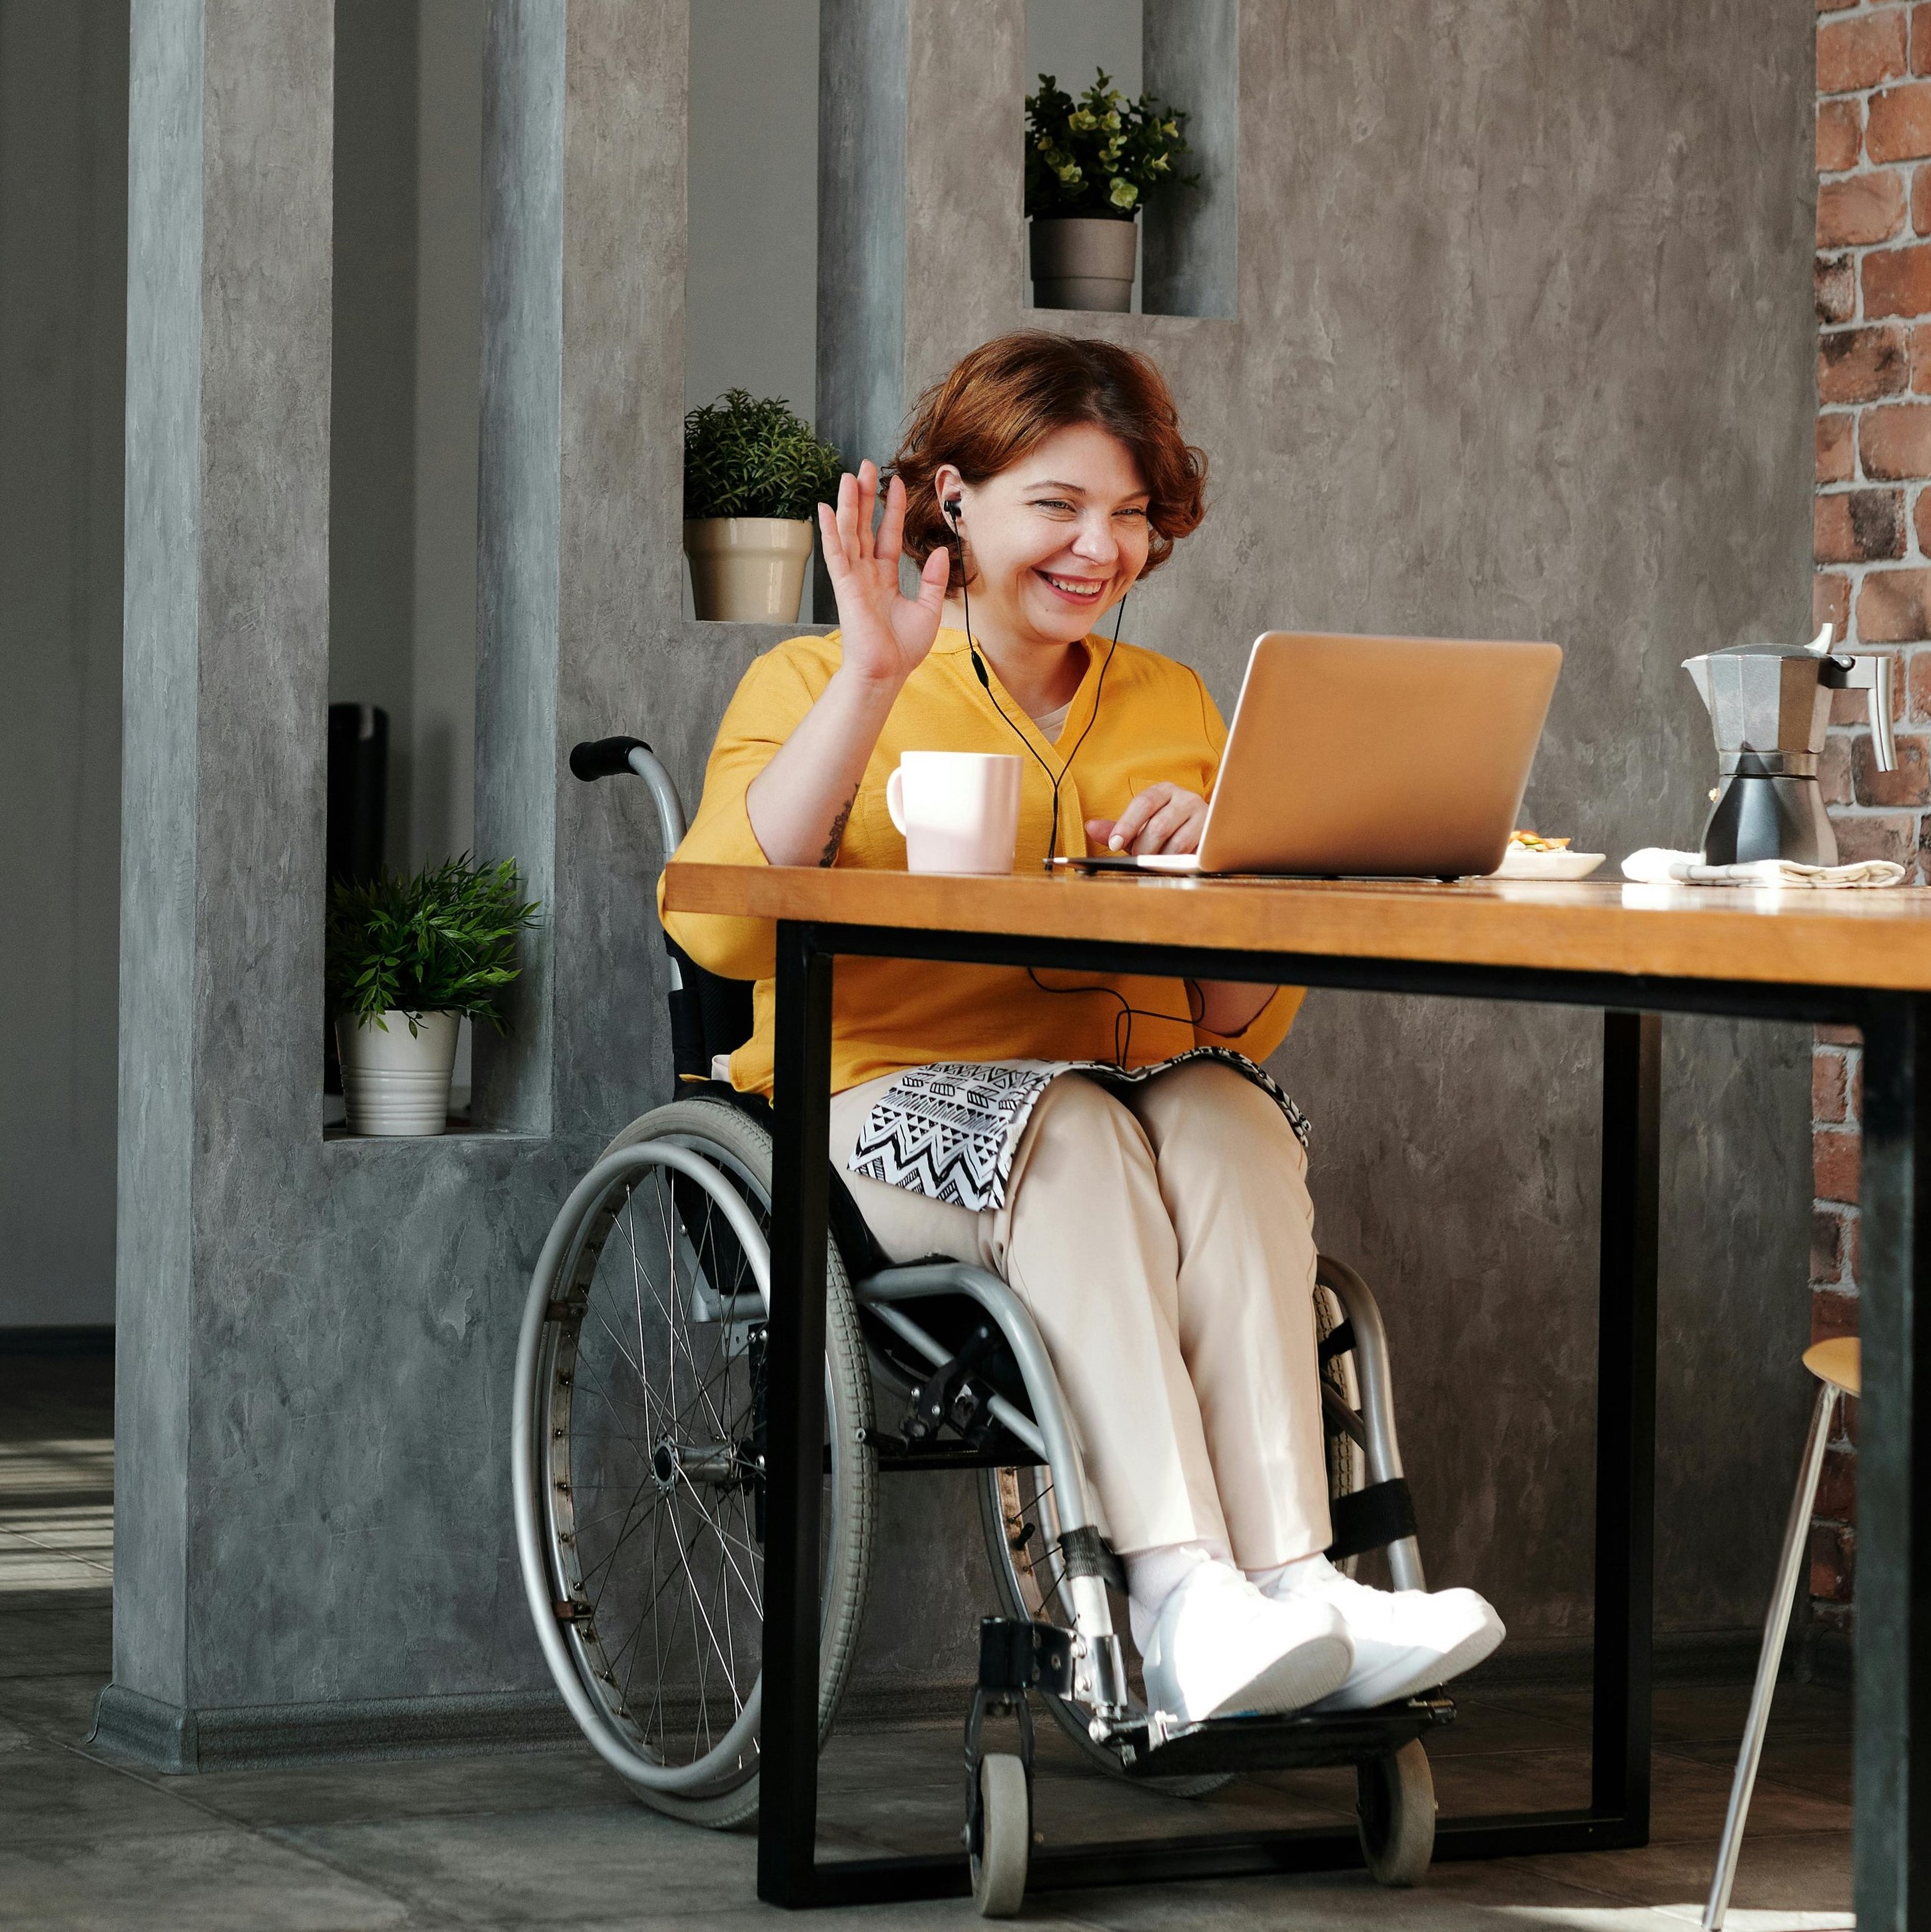 Image of woman in a wheelchair at table on conference call, waving at the camera with cup of coffee beside her.